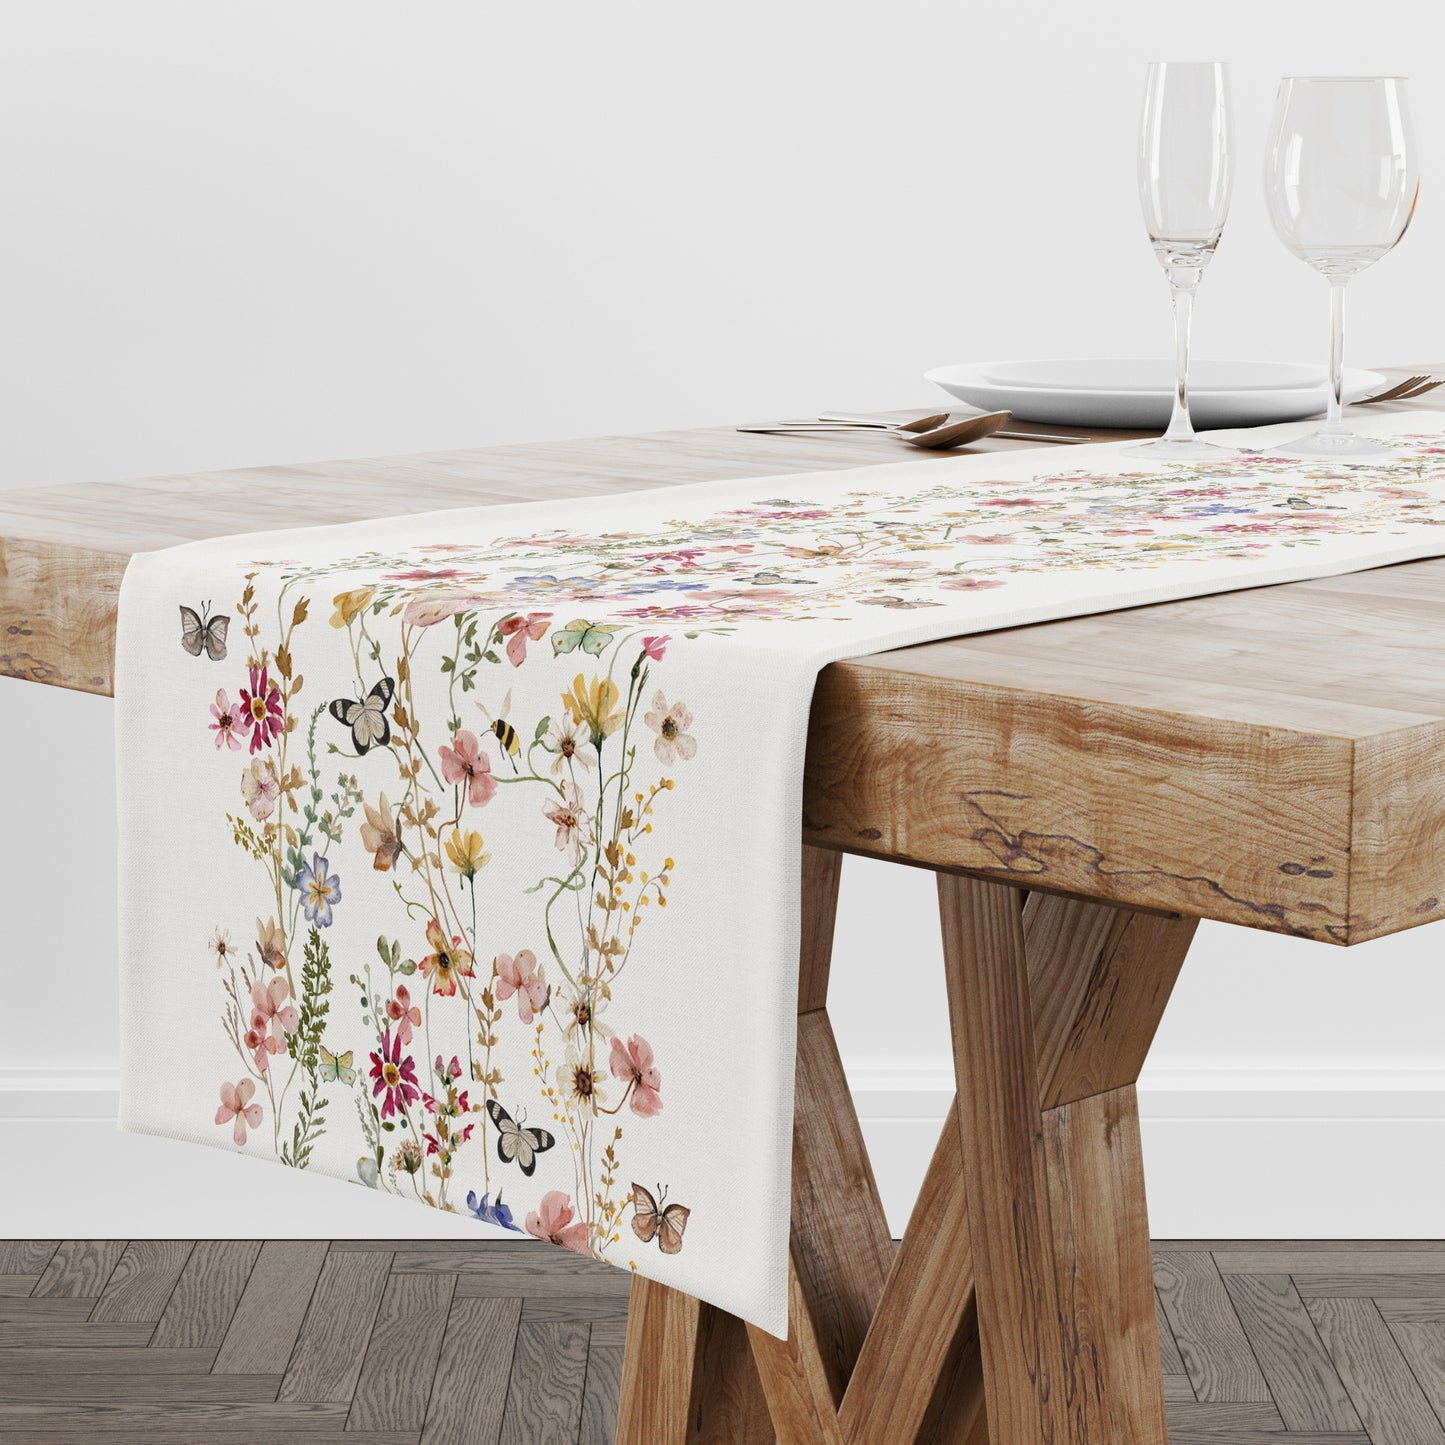 wood table and Watercolor Pressed & Dried Wildflowers TABLE RUNNER from Blue Water Songs on it